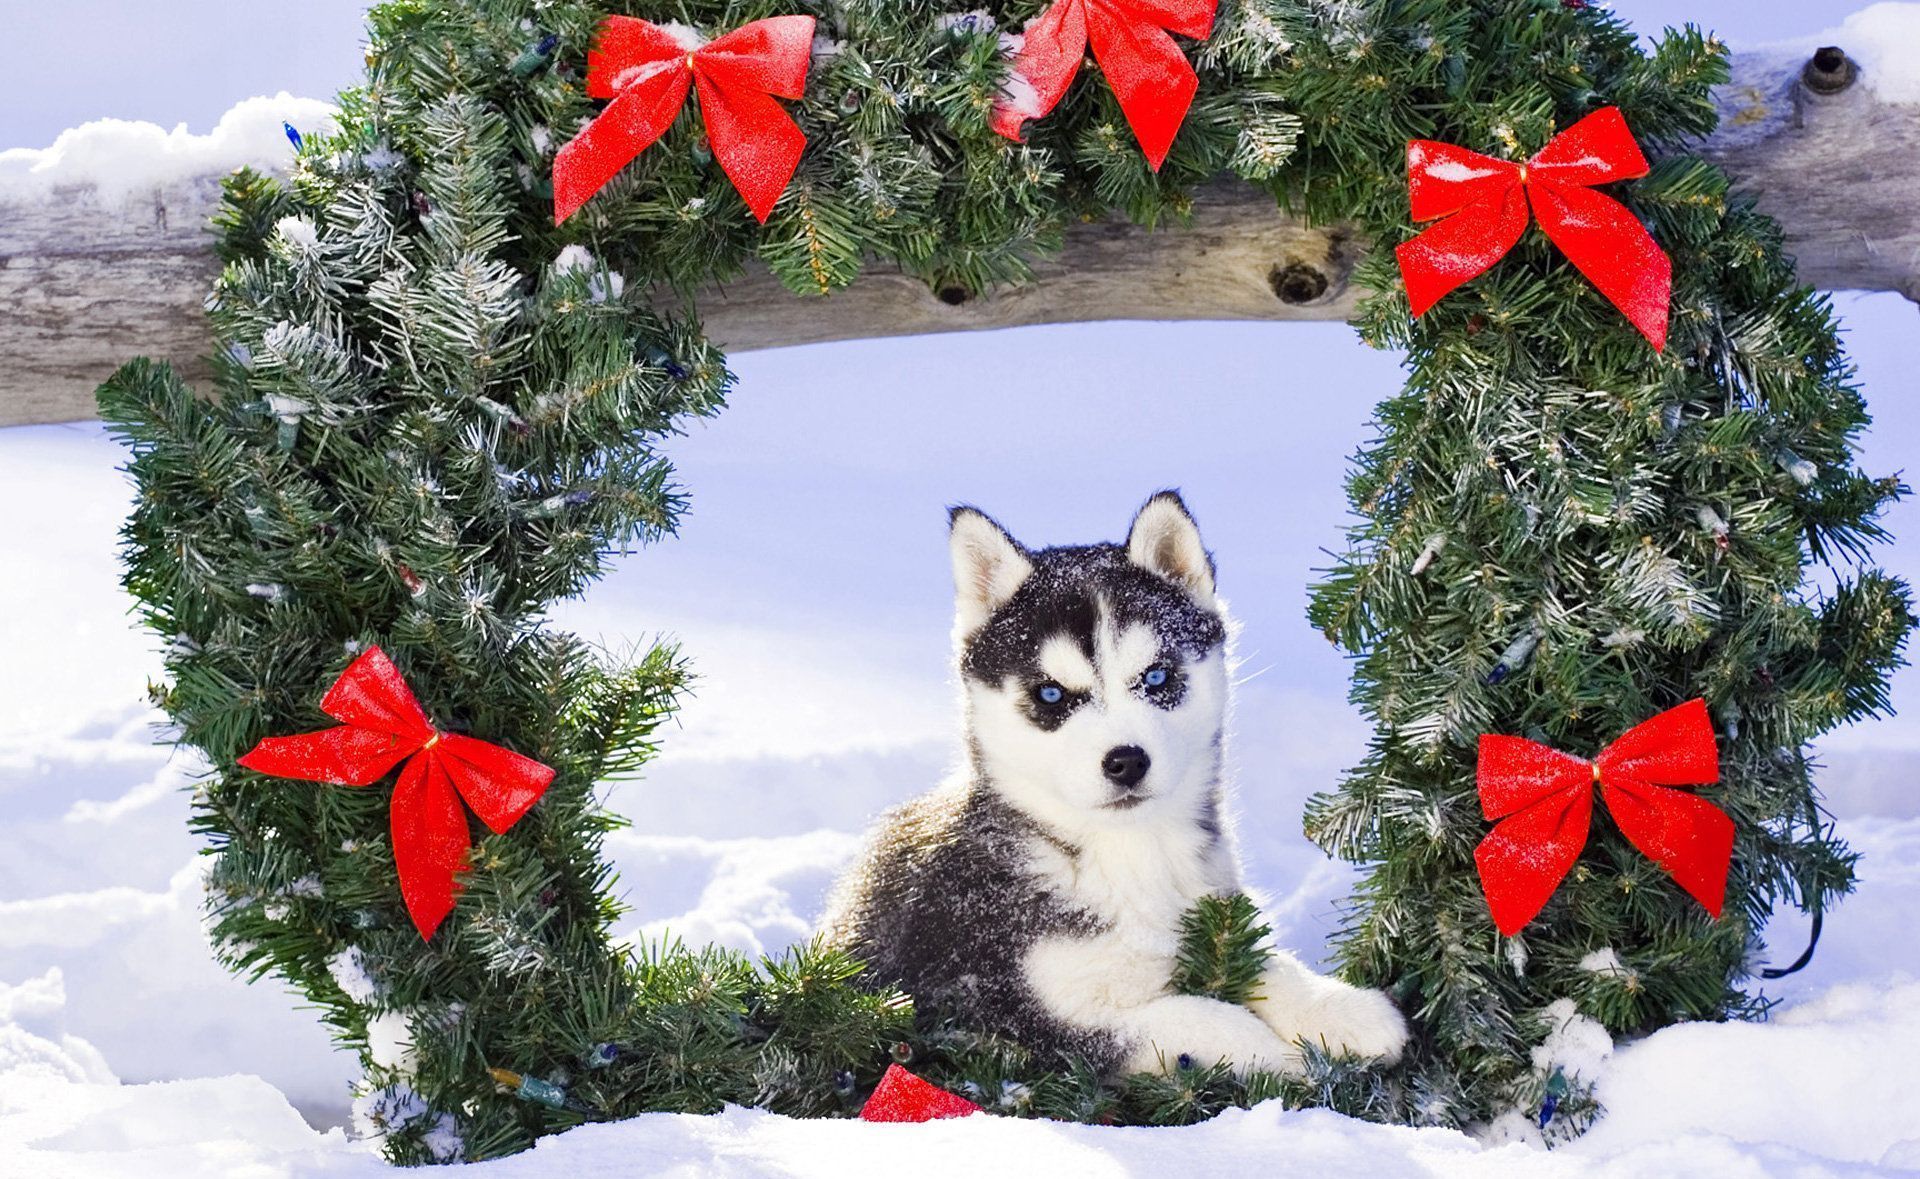 aww! cutest husky ever!. Dog breeds picture, Dog holiday, Dog breed info